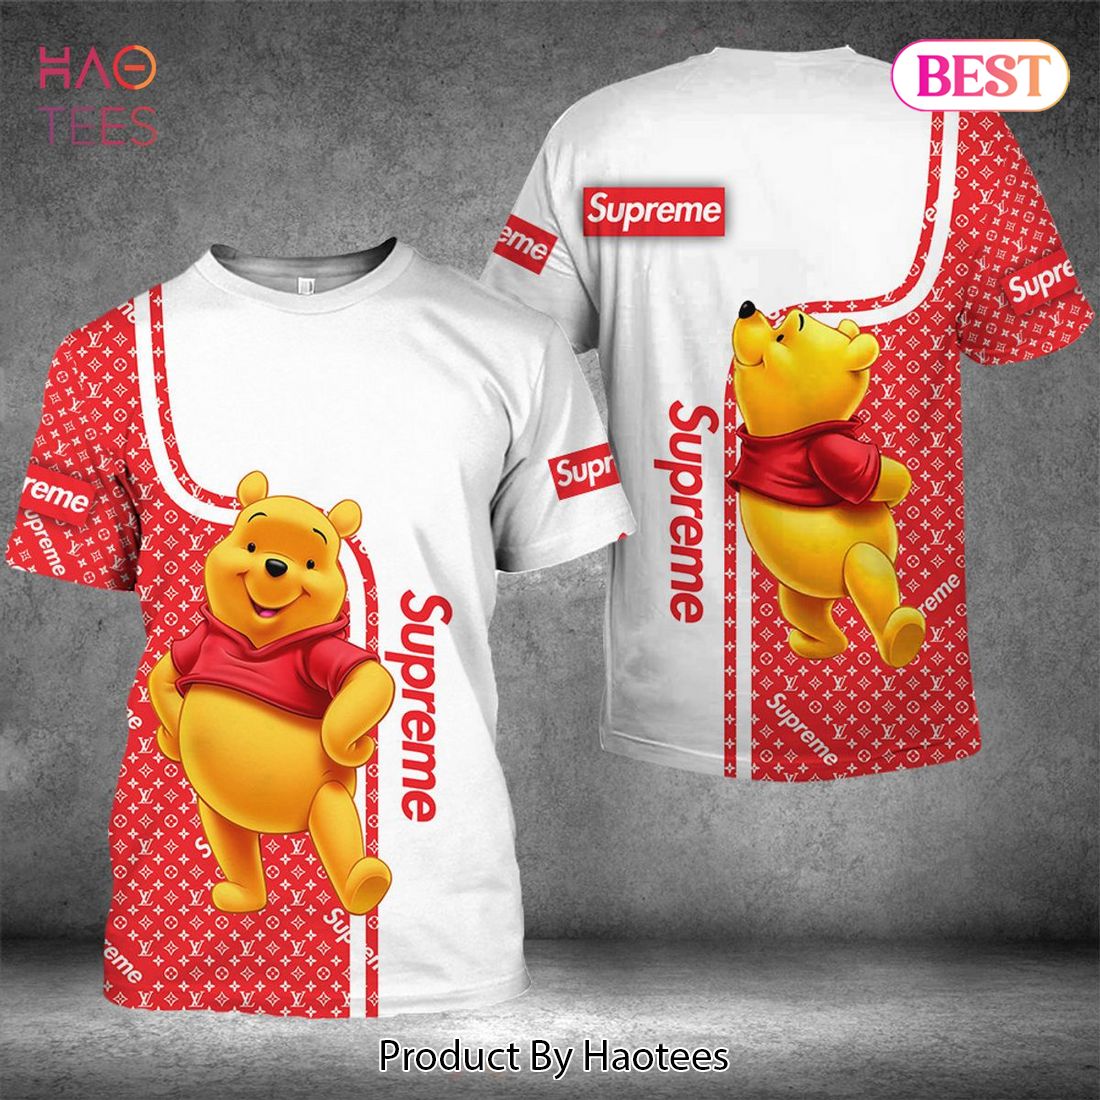 NEW Supreme Winnie The Pooh Luxury Brand 3D T-Shirt Limited Edition